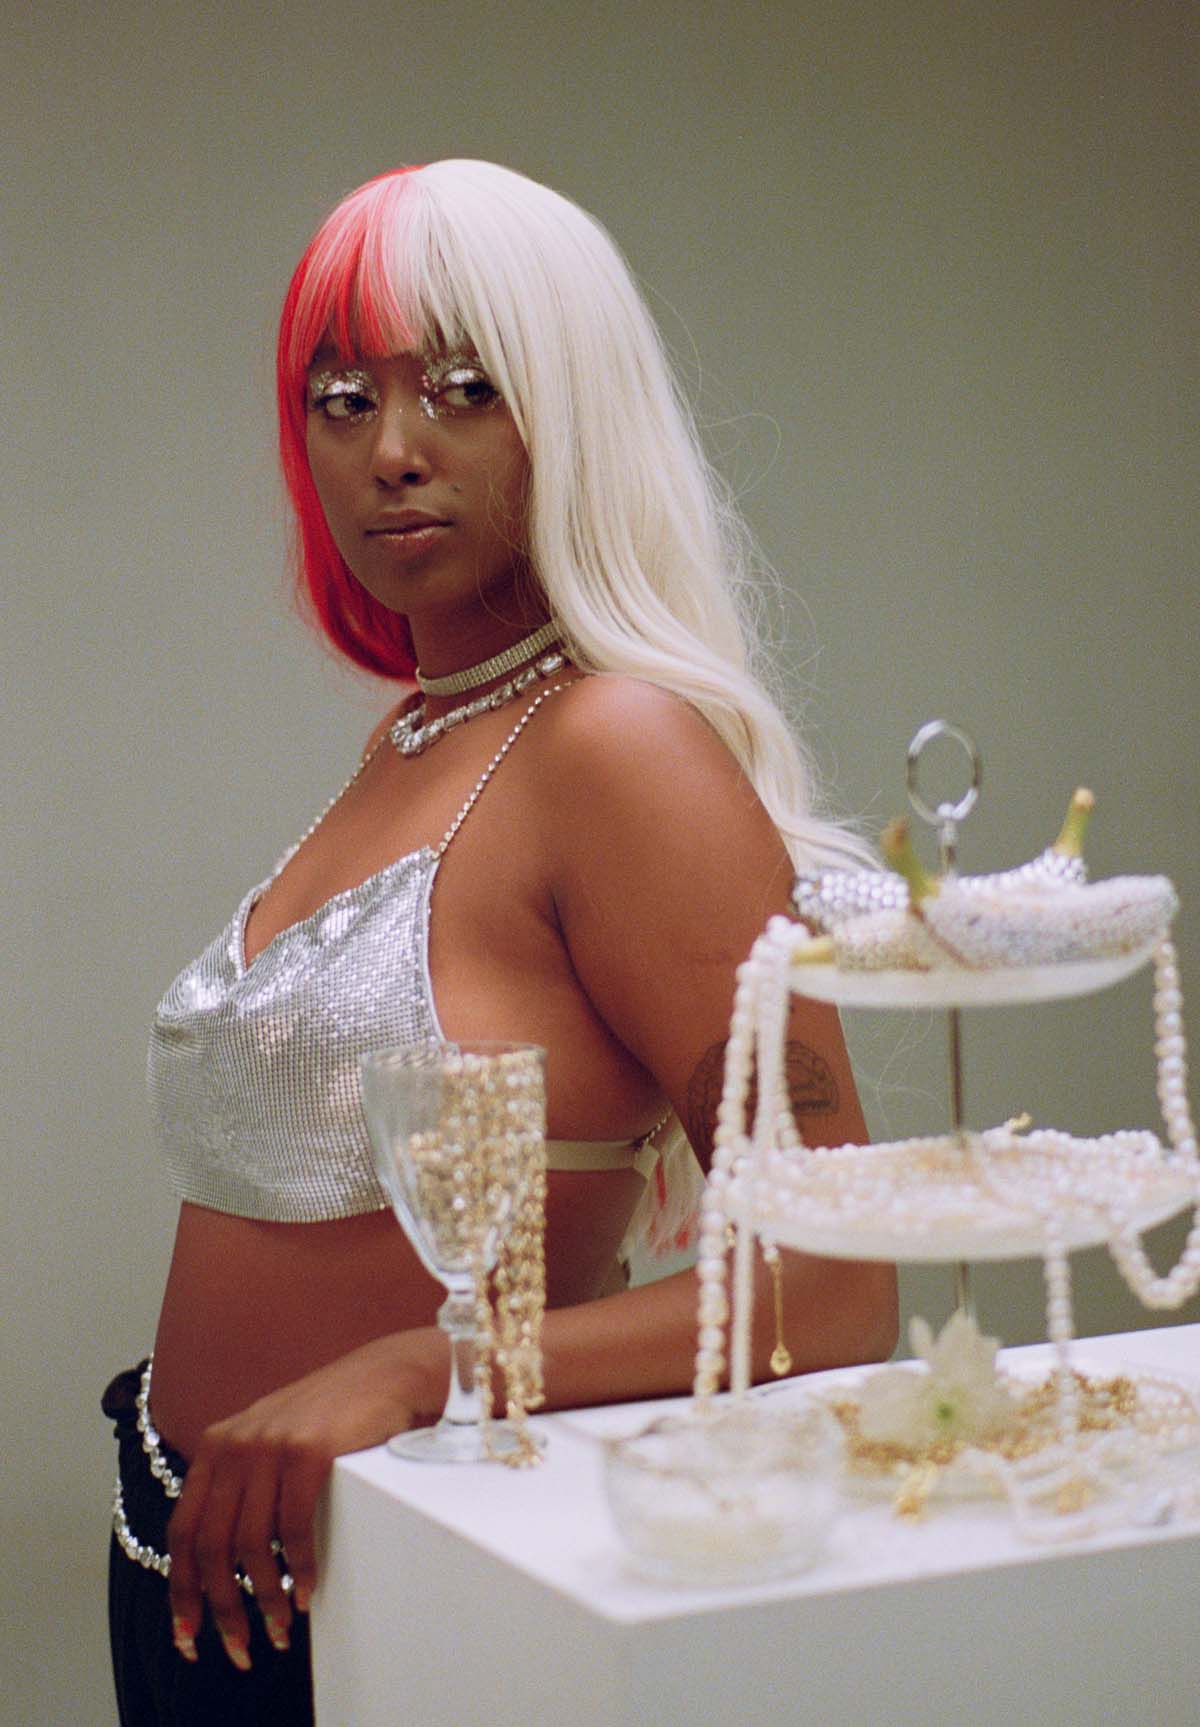 A black woman with a blonde-pink long wig and a glittering silver crop top with spaghetti straps leans casually against a white bar table, on which stands an etagere full of pearl necklaces and a glass with gold chains. Eden Derso's eyes are highlighted with glittering silver make-up.